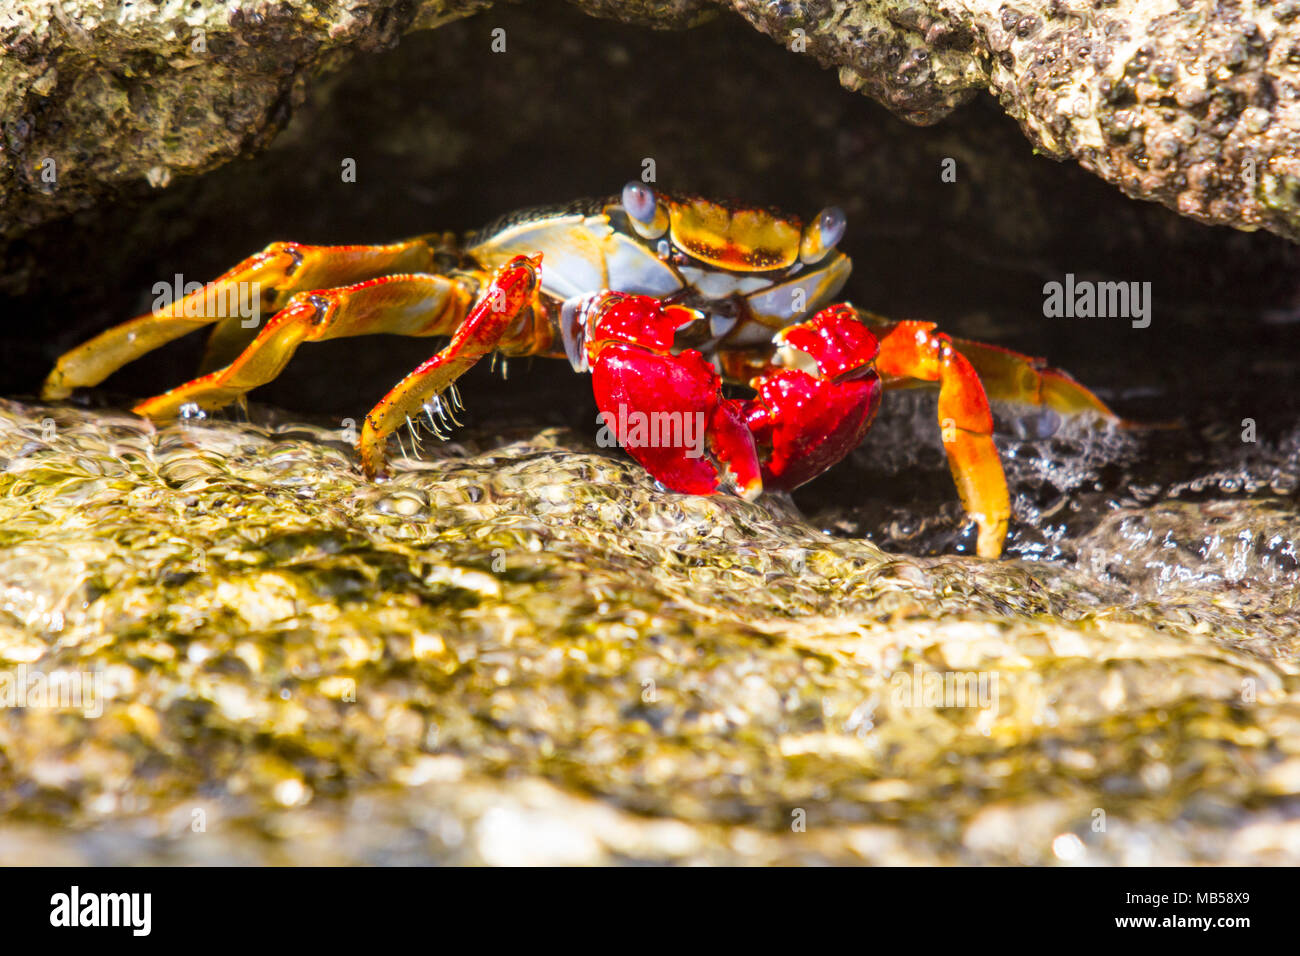 Close up of a Bright Sally Lightfoot Crab on Rocks, Palm Island, Saint Vincent and the Grenadines, Caribbean. Stock Photo